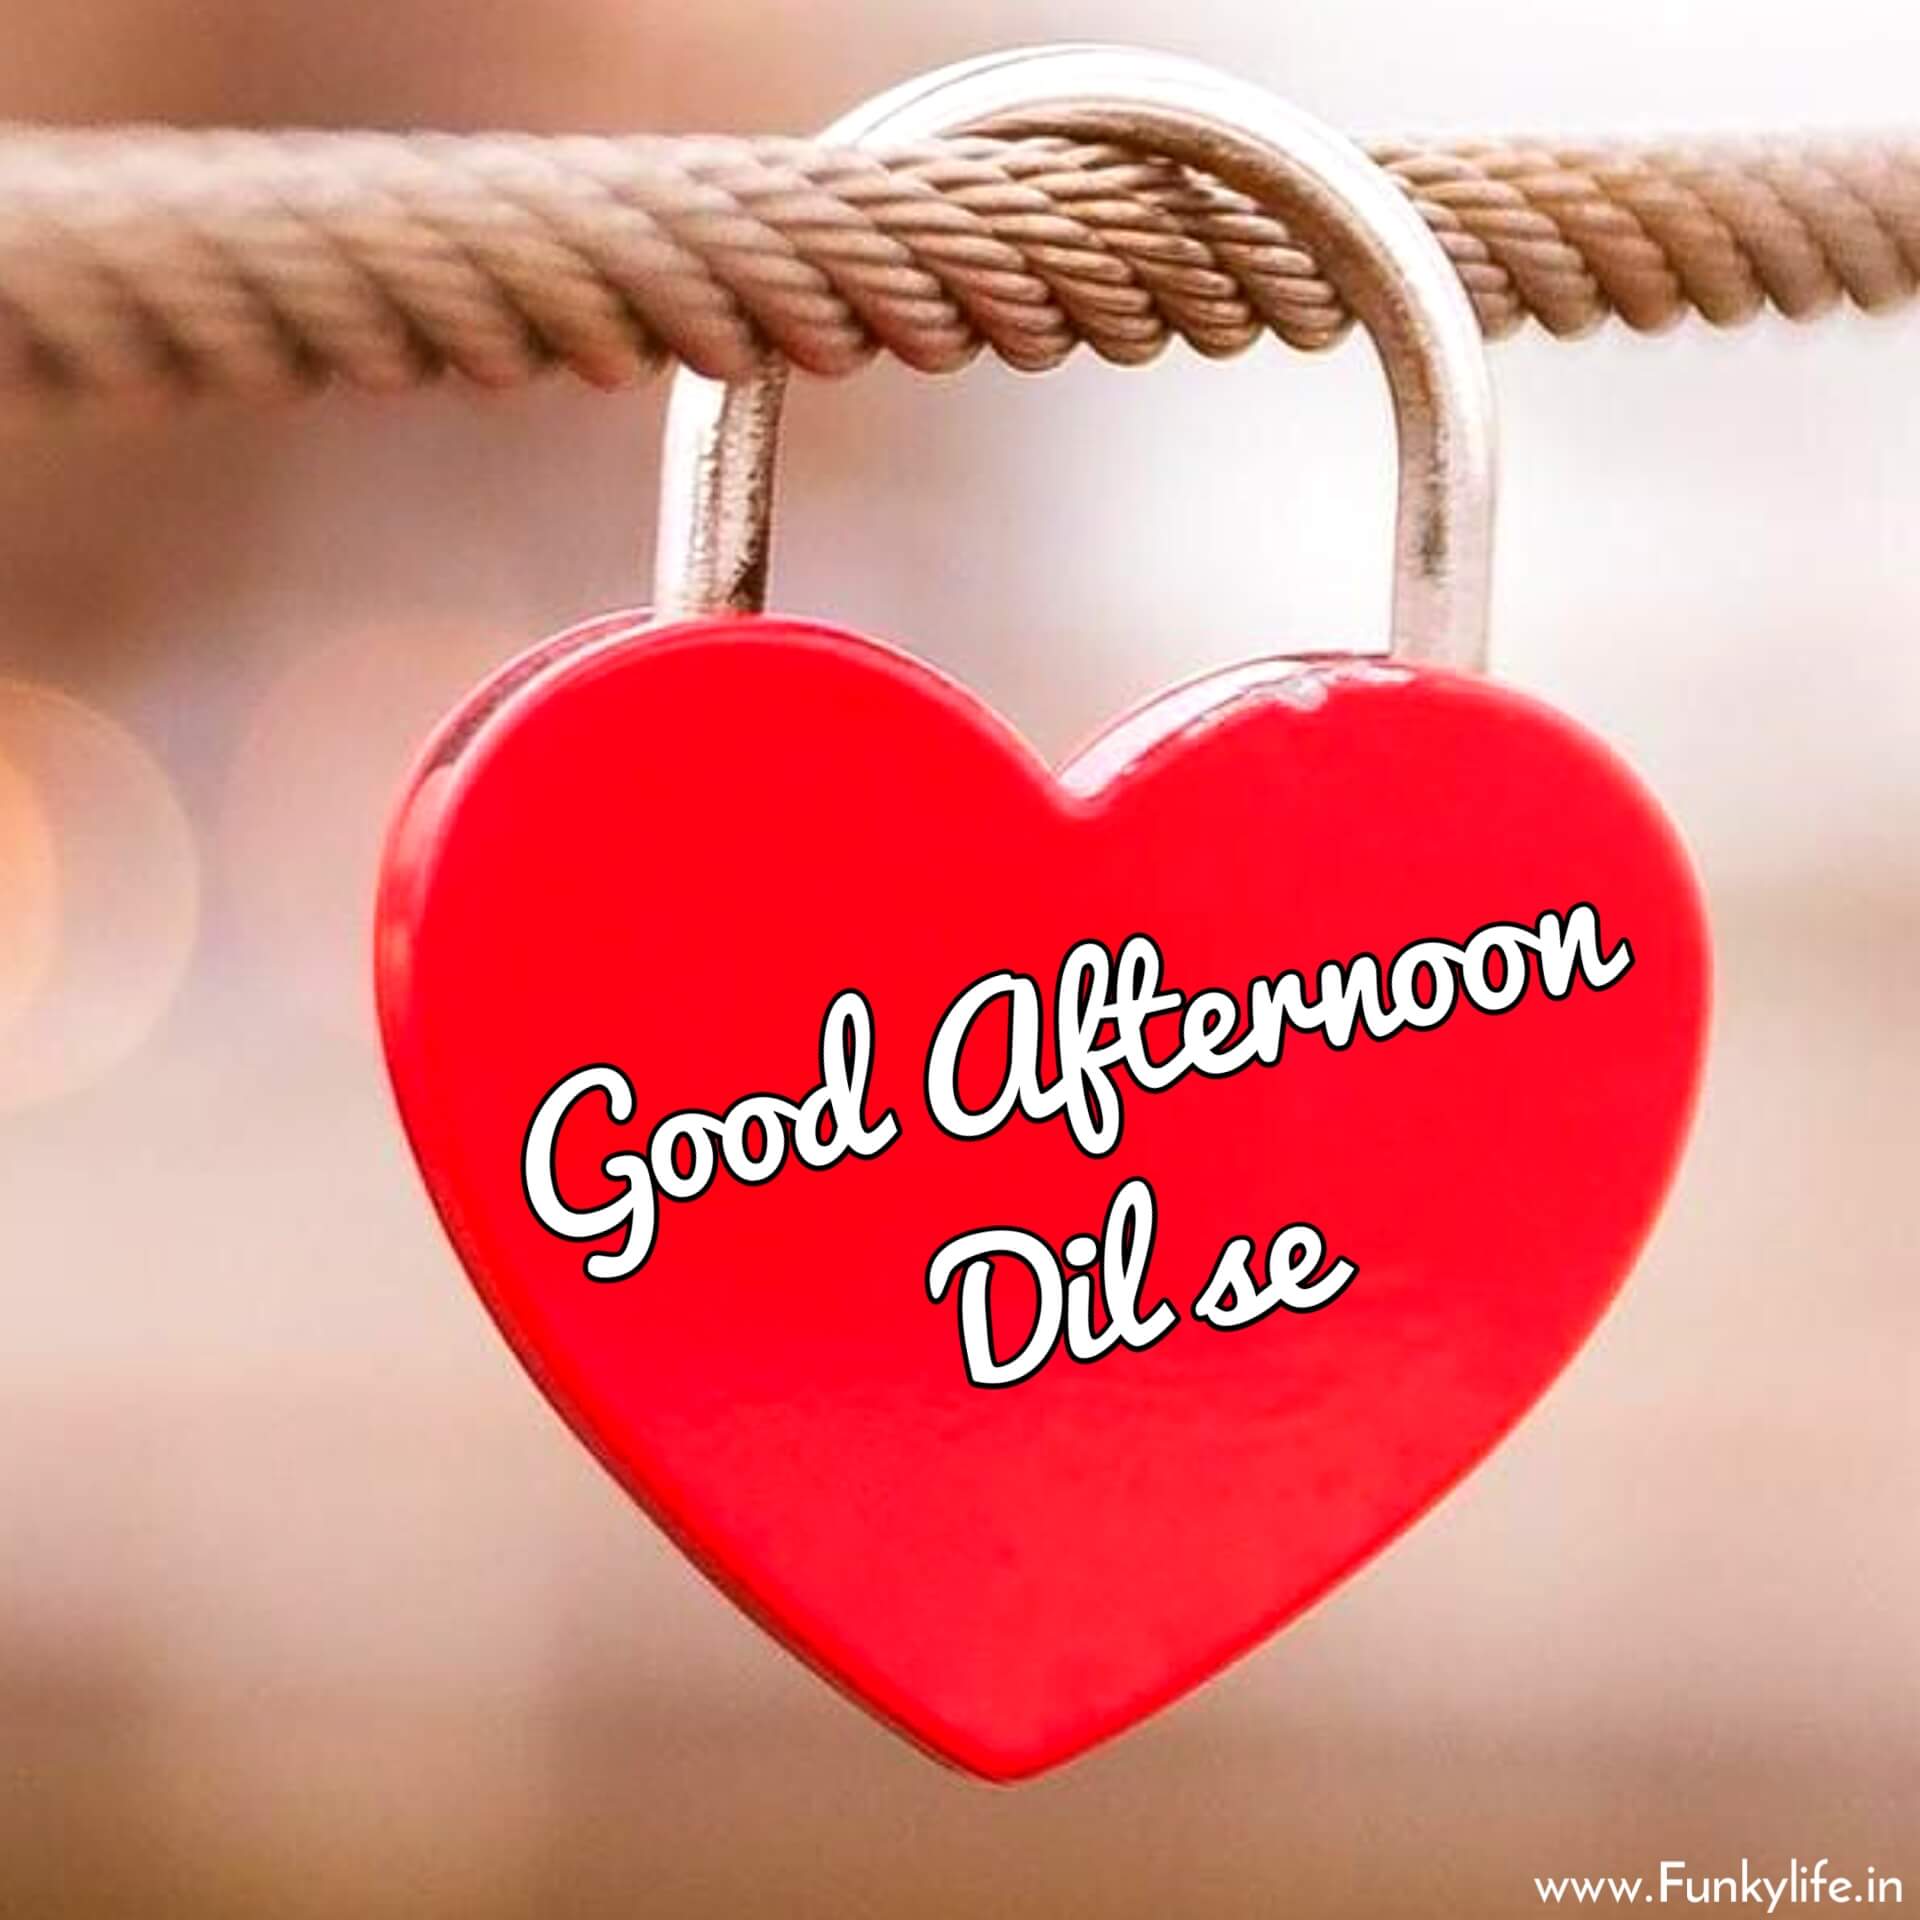 Good Afternoon Dil Se